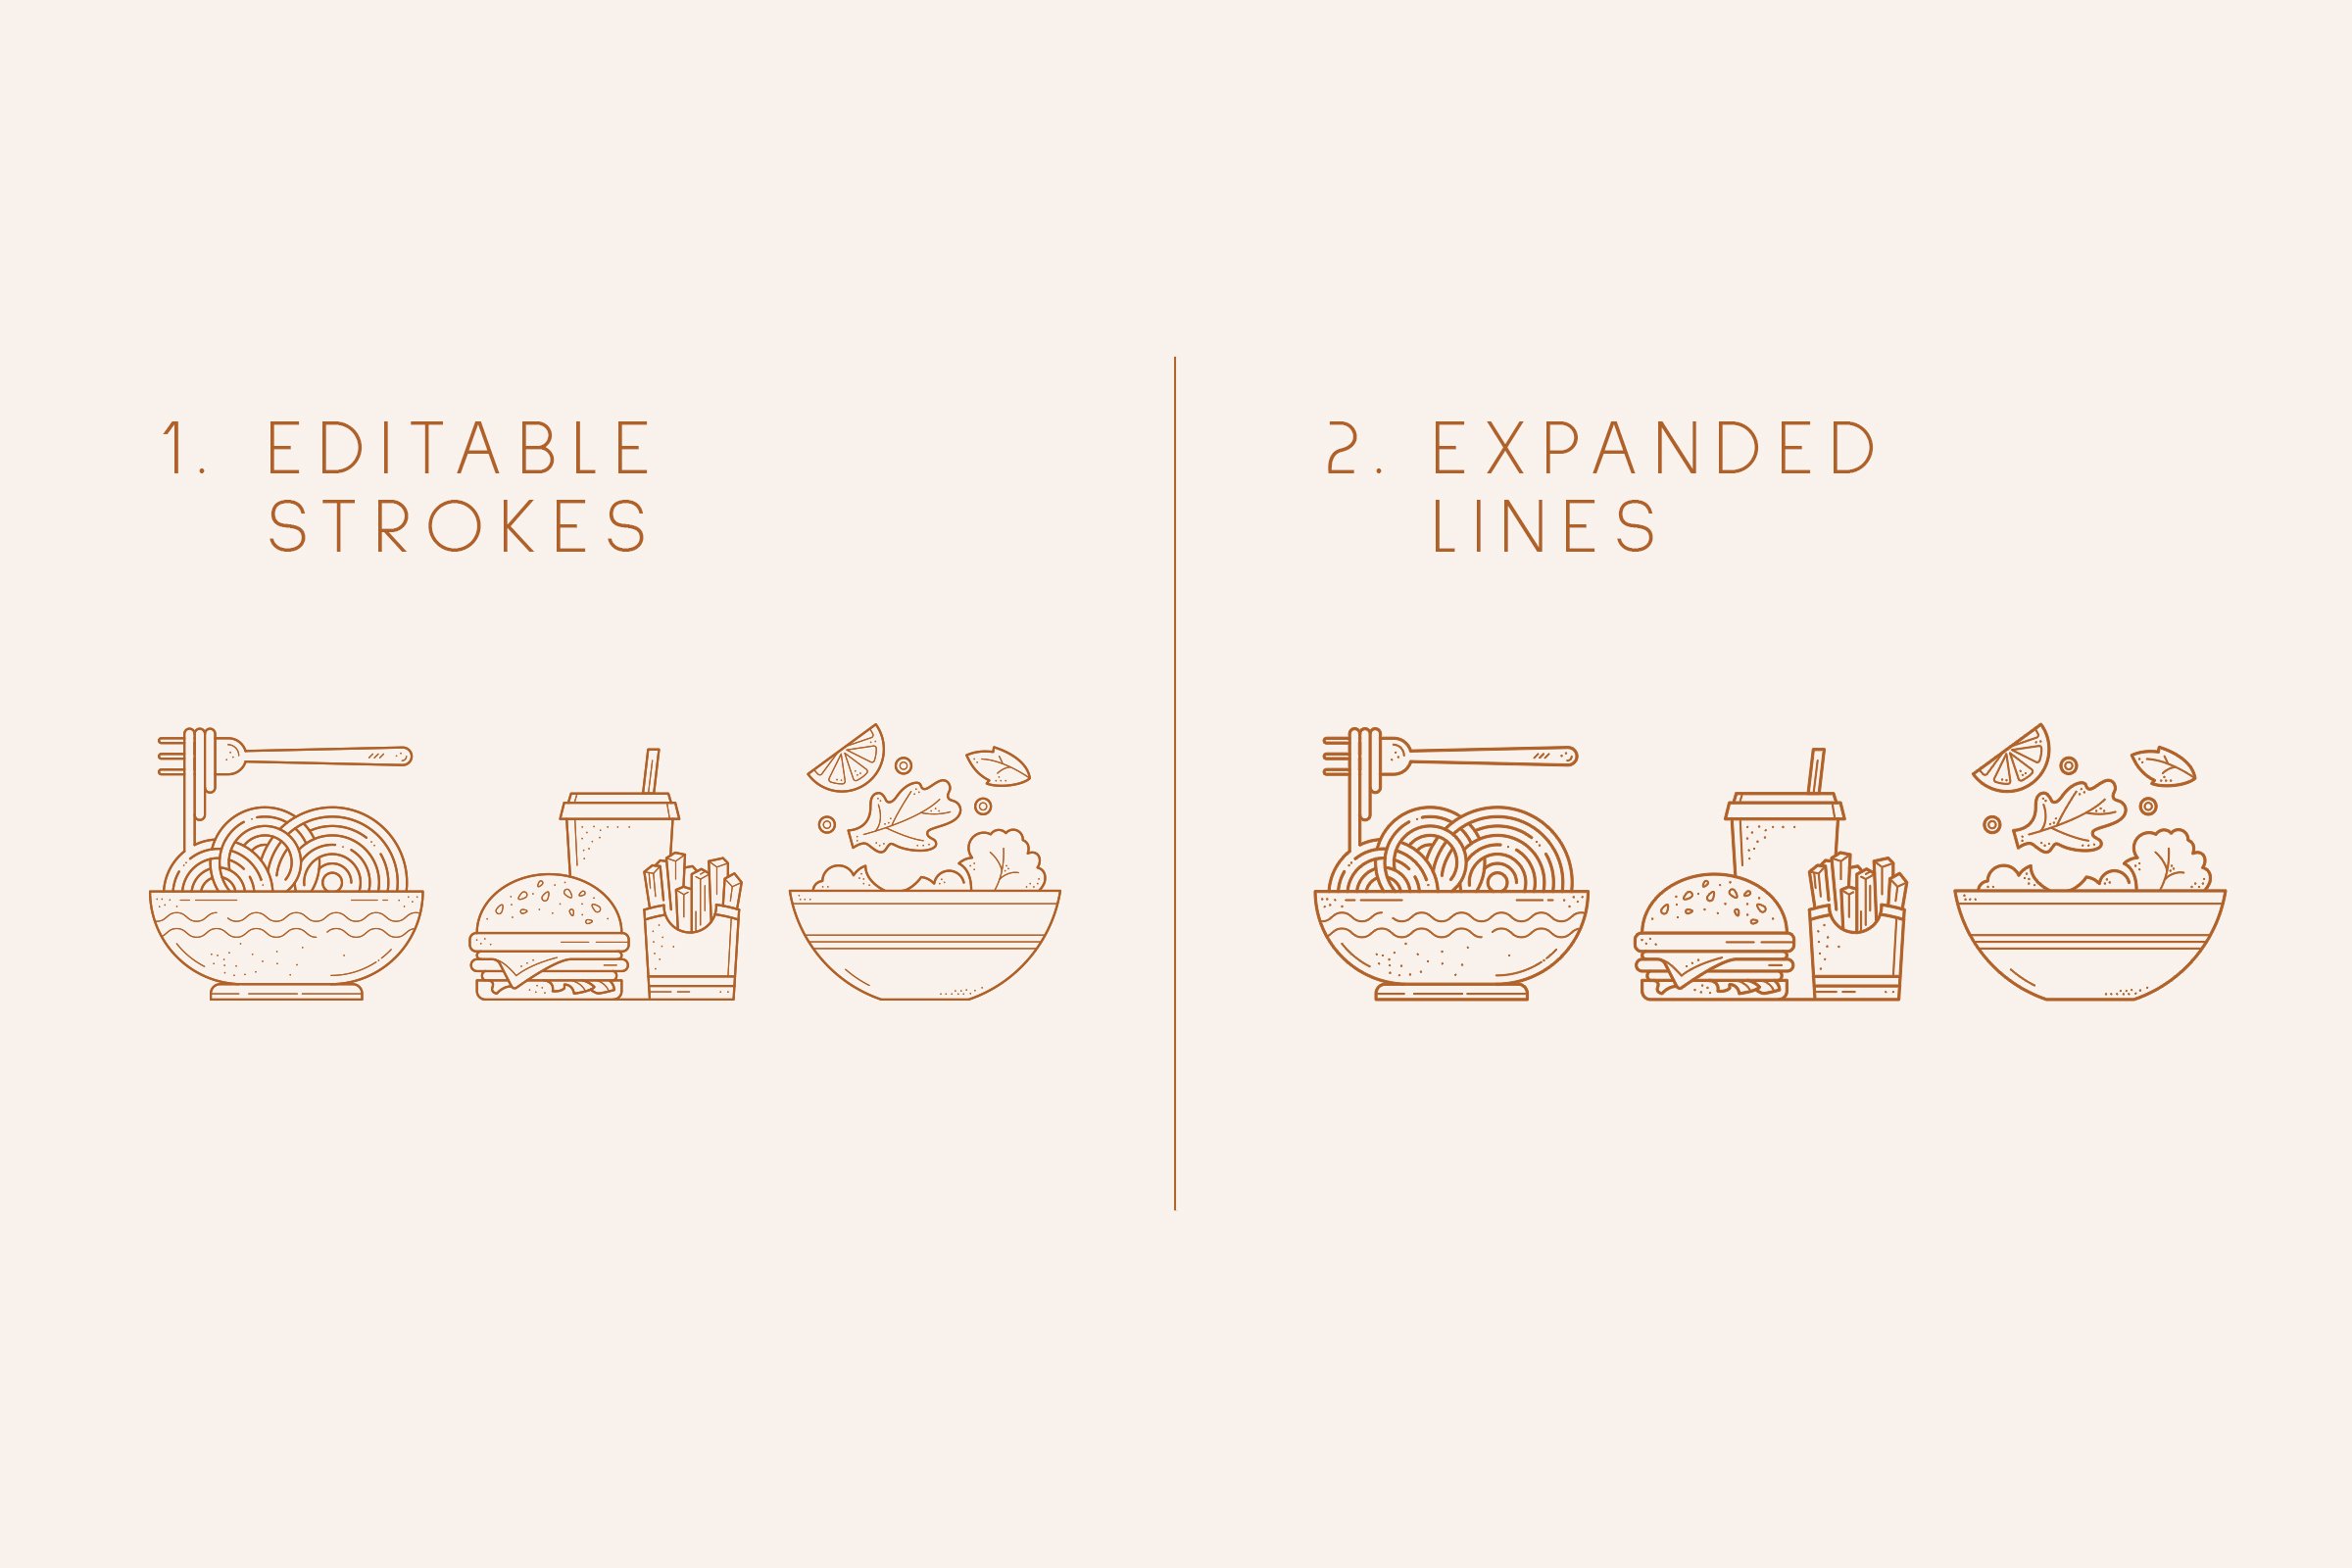 Editable strokes, expanded lines.